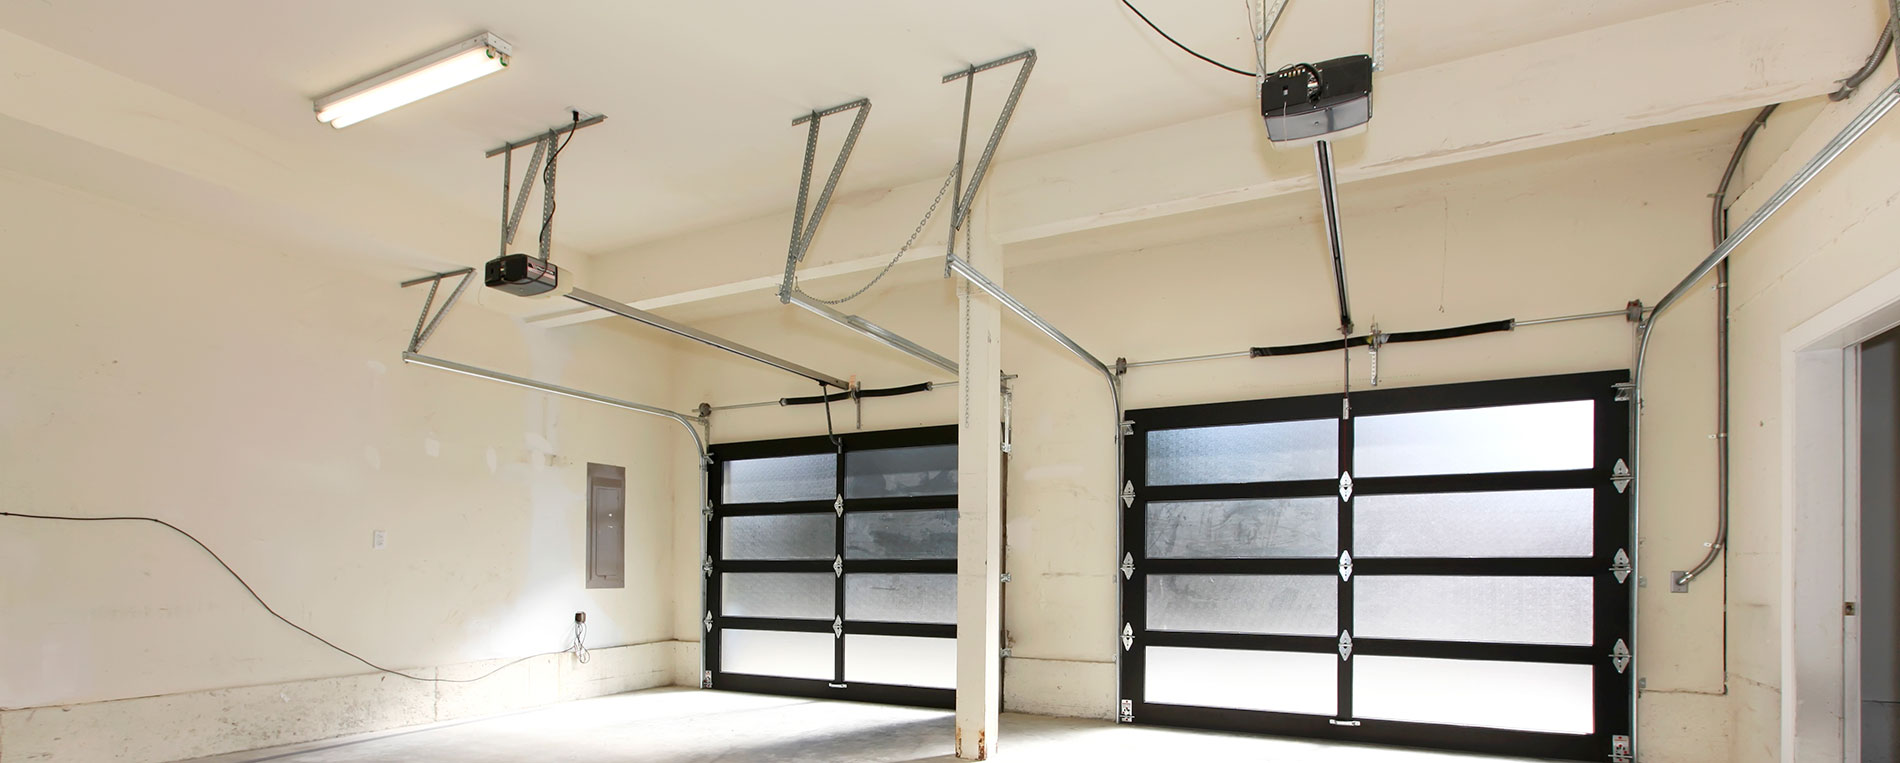 The Best Strategy for Dealing with a Noisy Garage Door